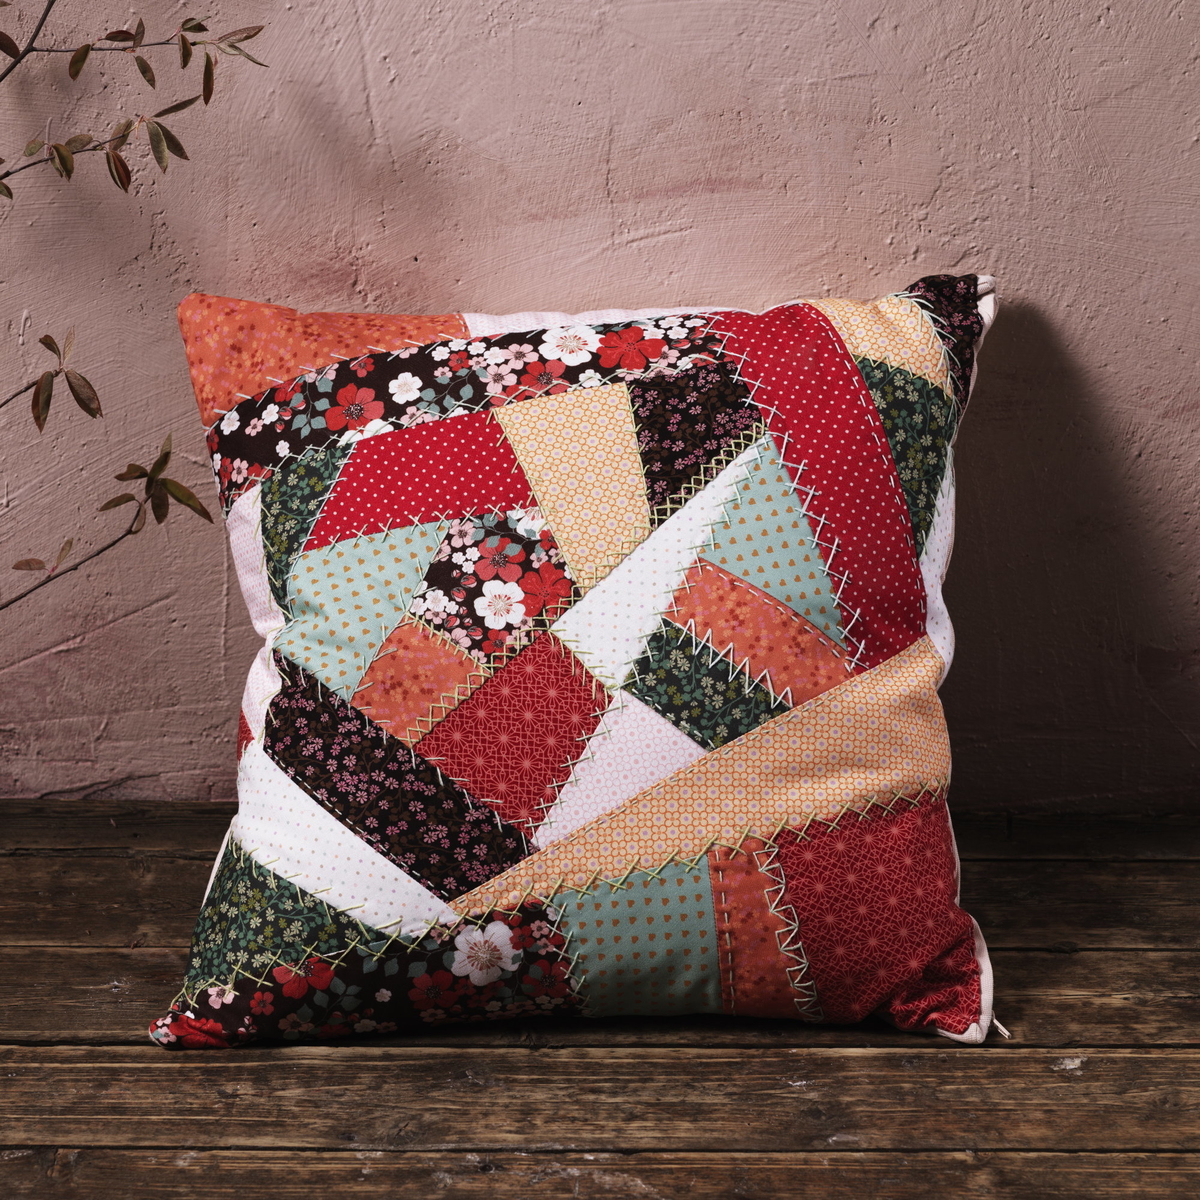 Sew a cushion in patchwork